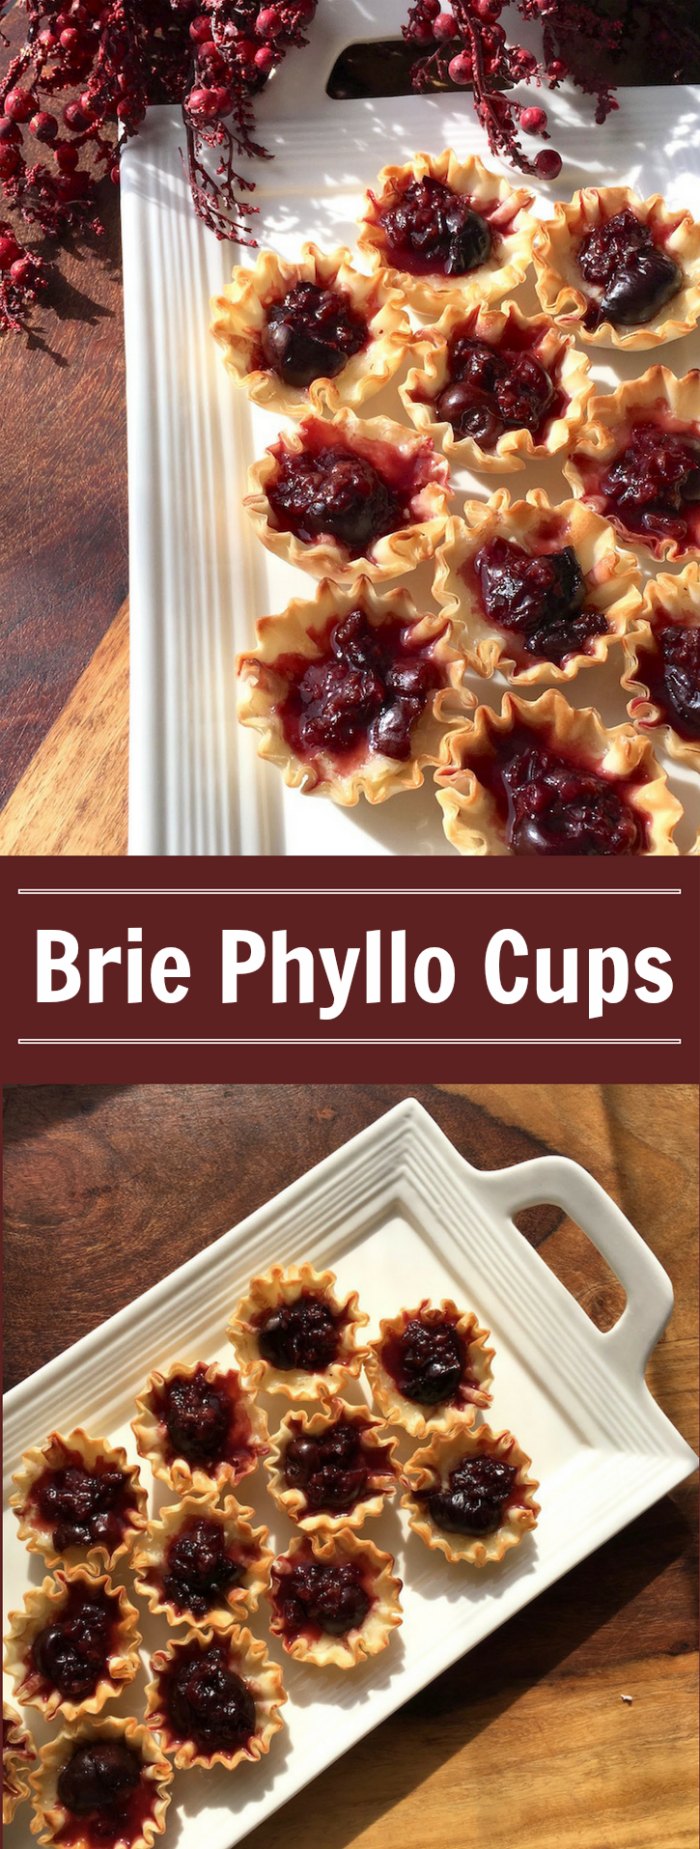 Brie and Dark Cherry Phyllo Cup Recipe | Mommy Evolution #phyllocup #appetizer #phyllorecipe #cherry #brie